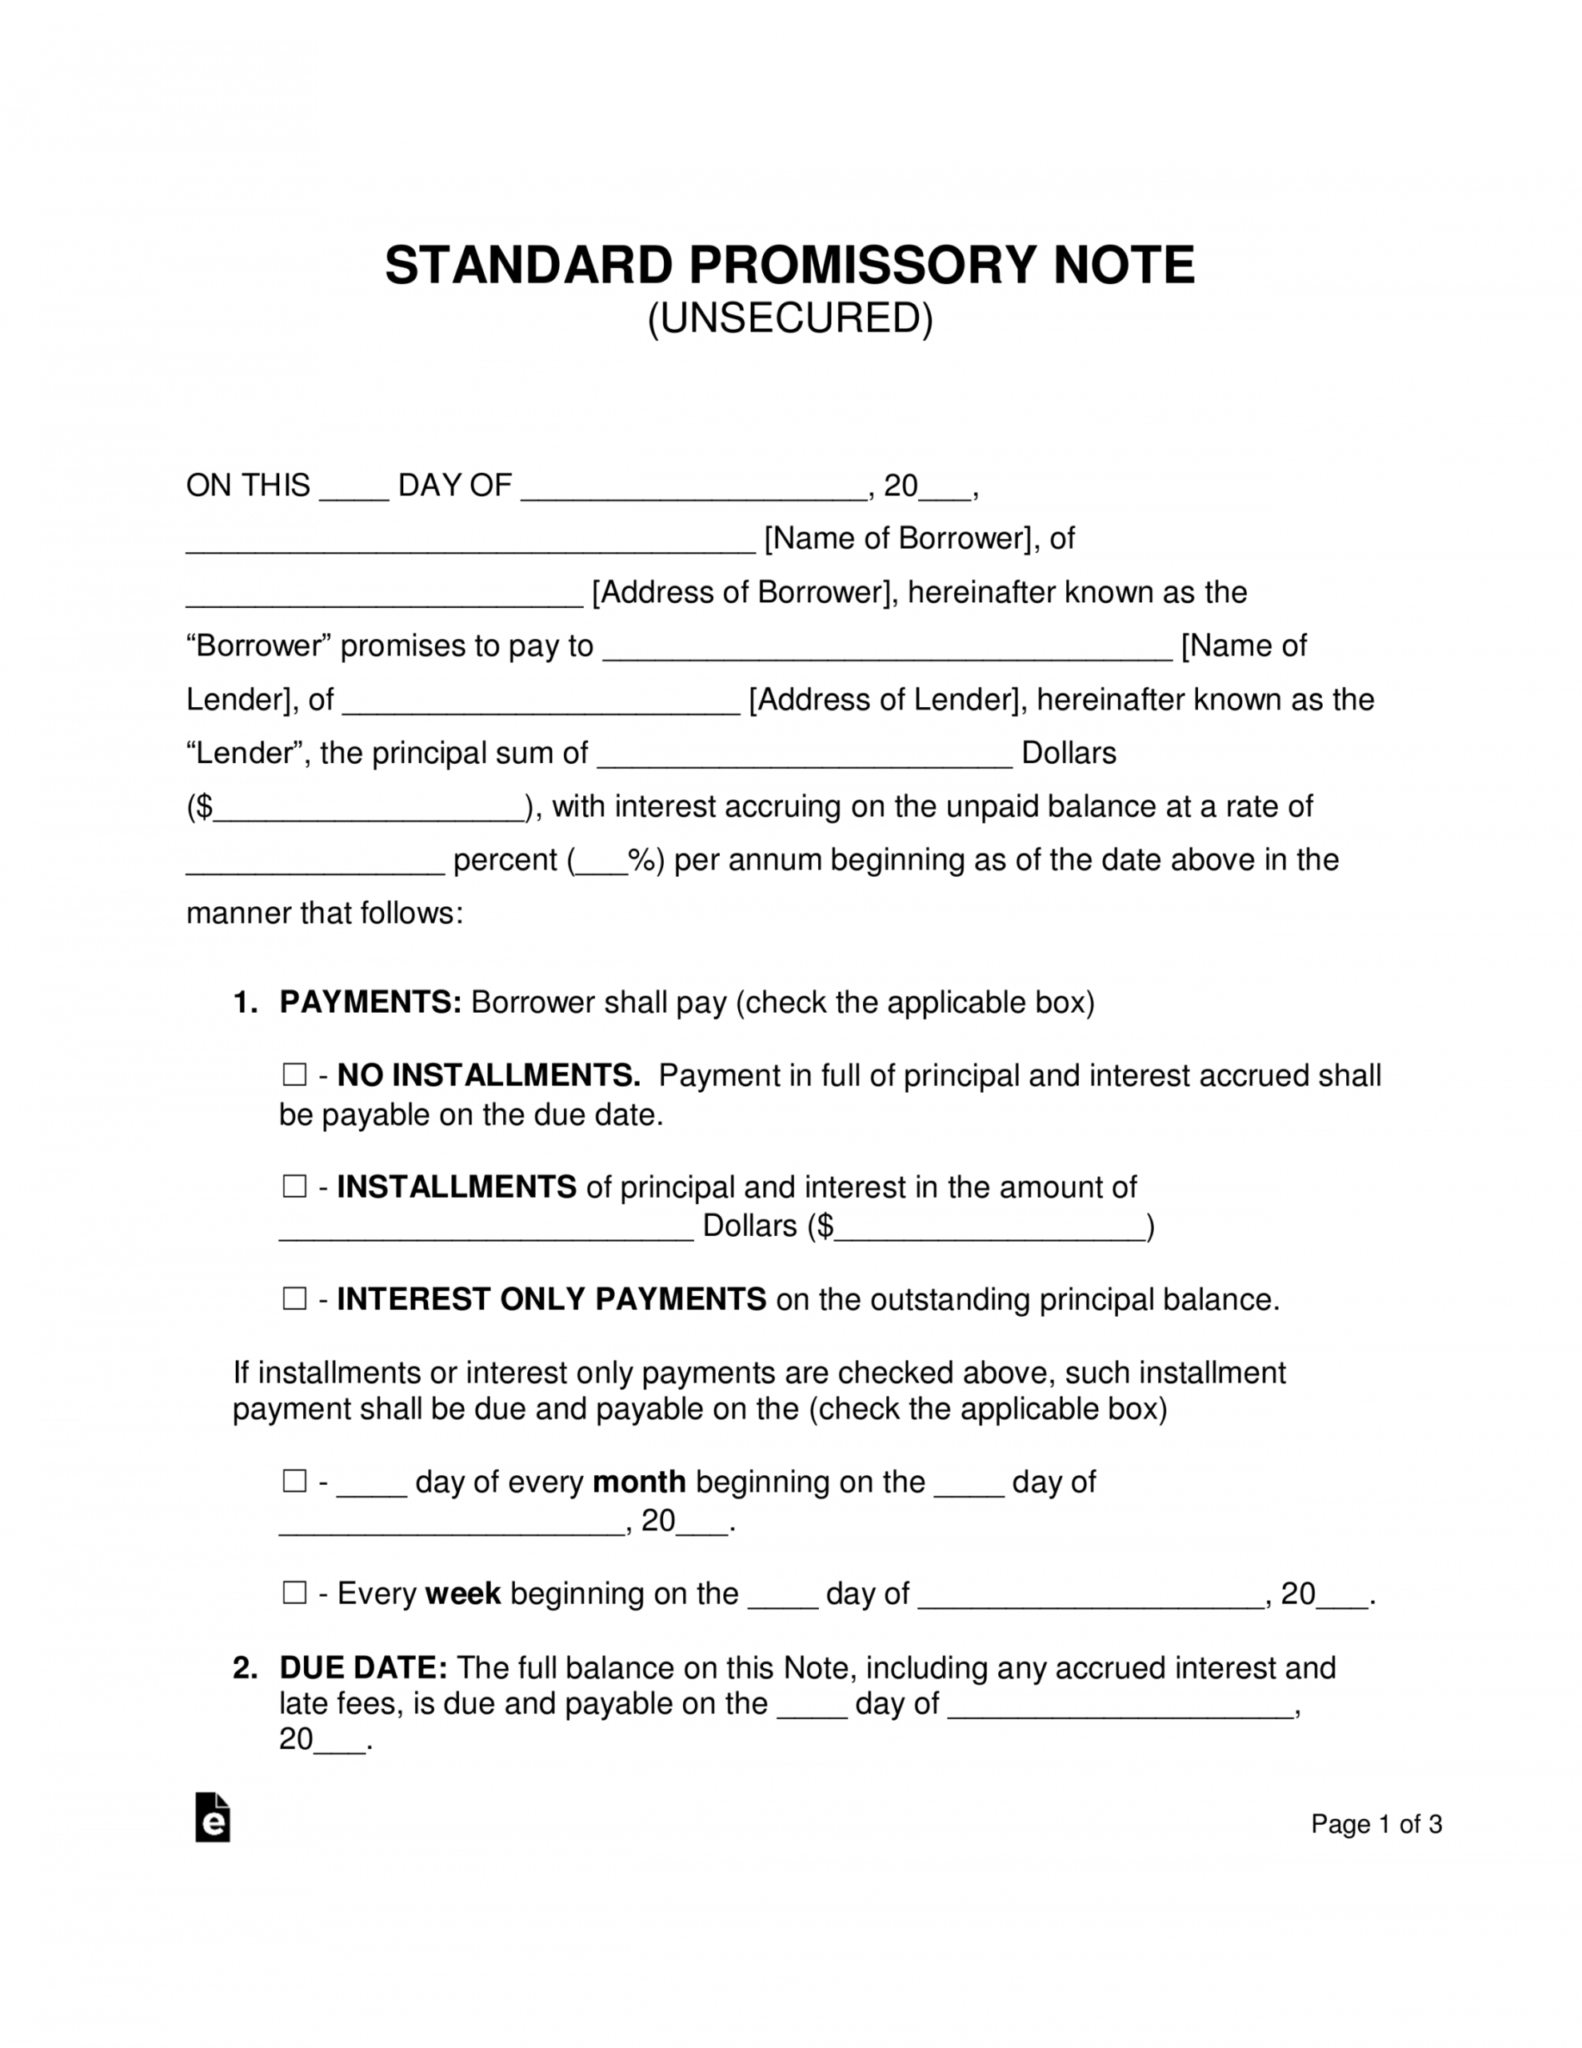 printable-free-unsecured-promissory-note-template-word-pdf-unsecured